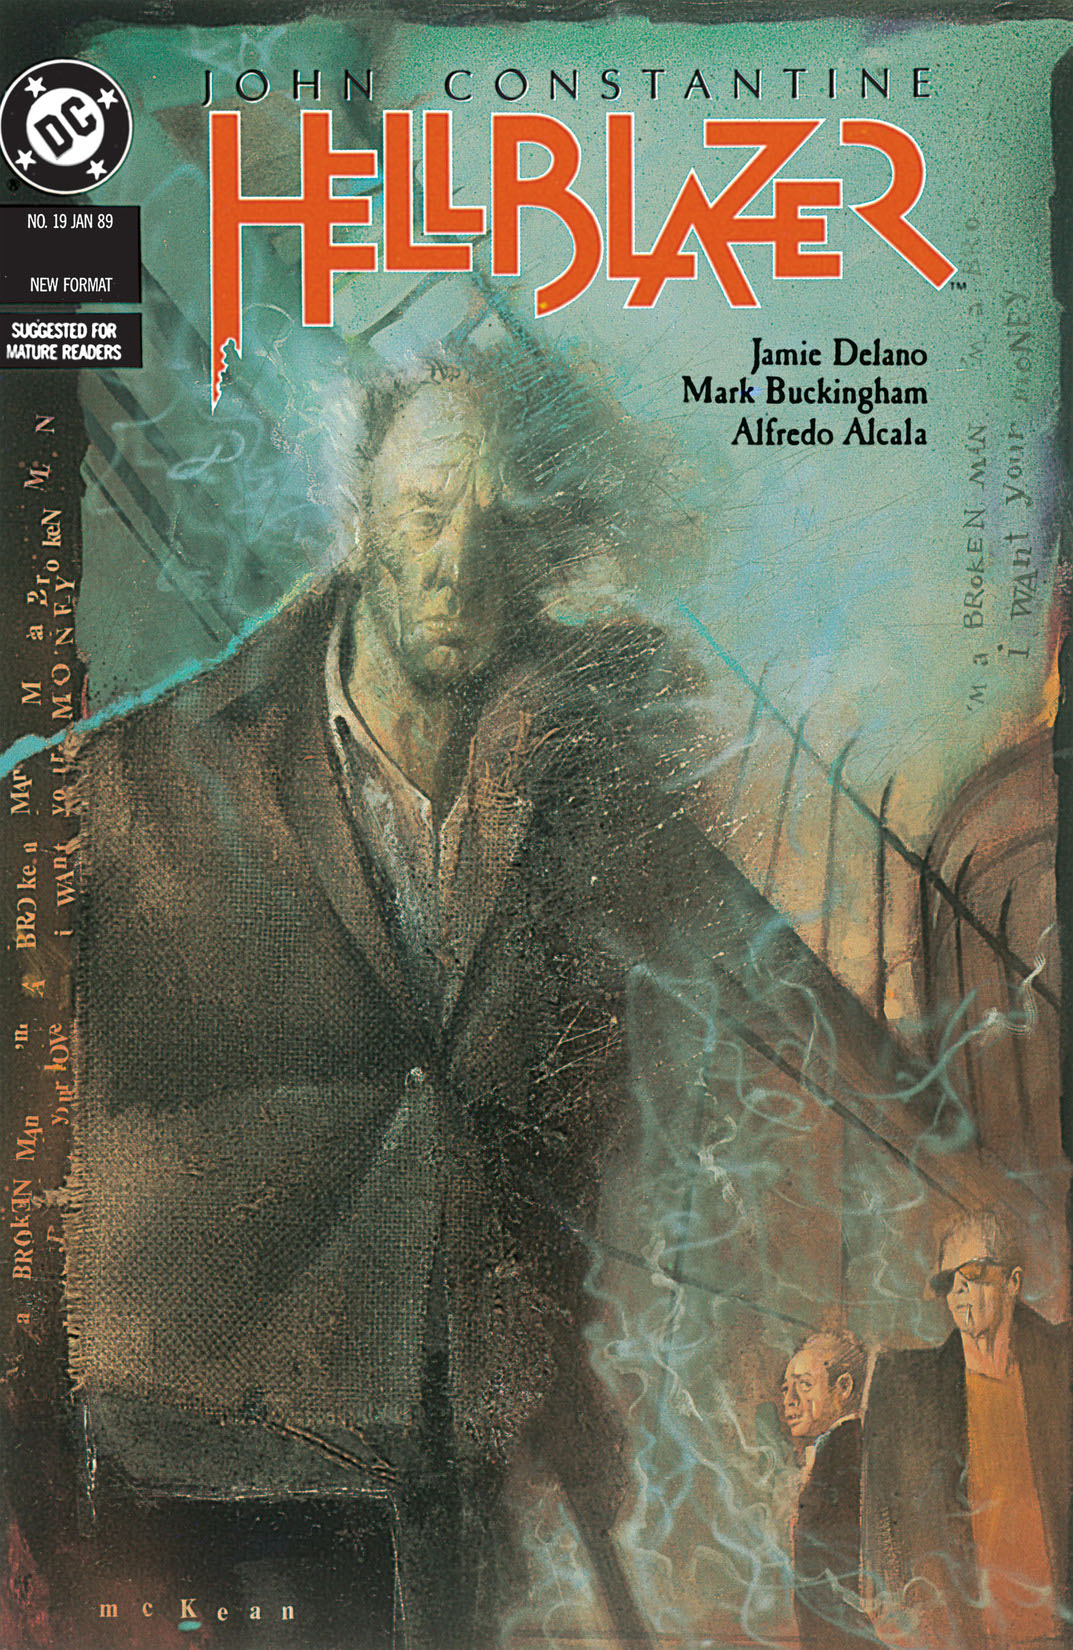 Hellblazer #19 preview images